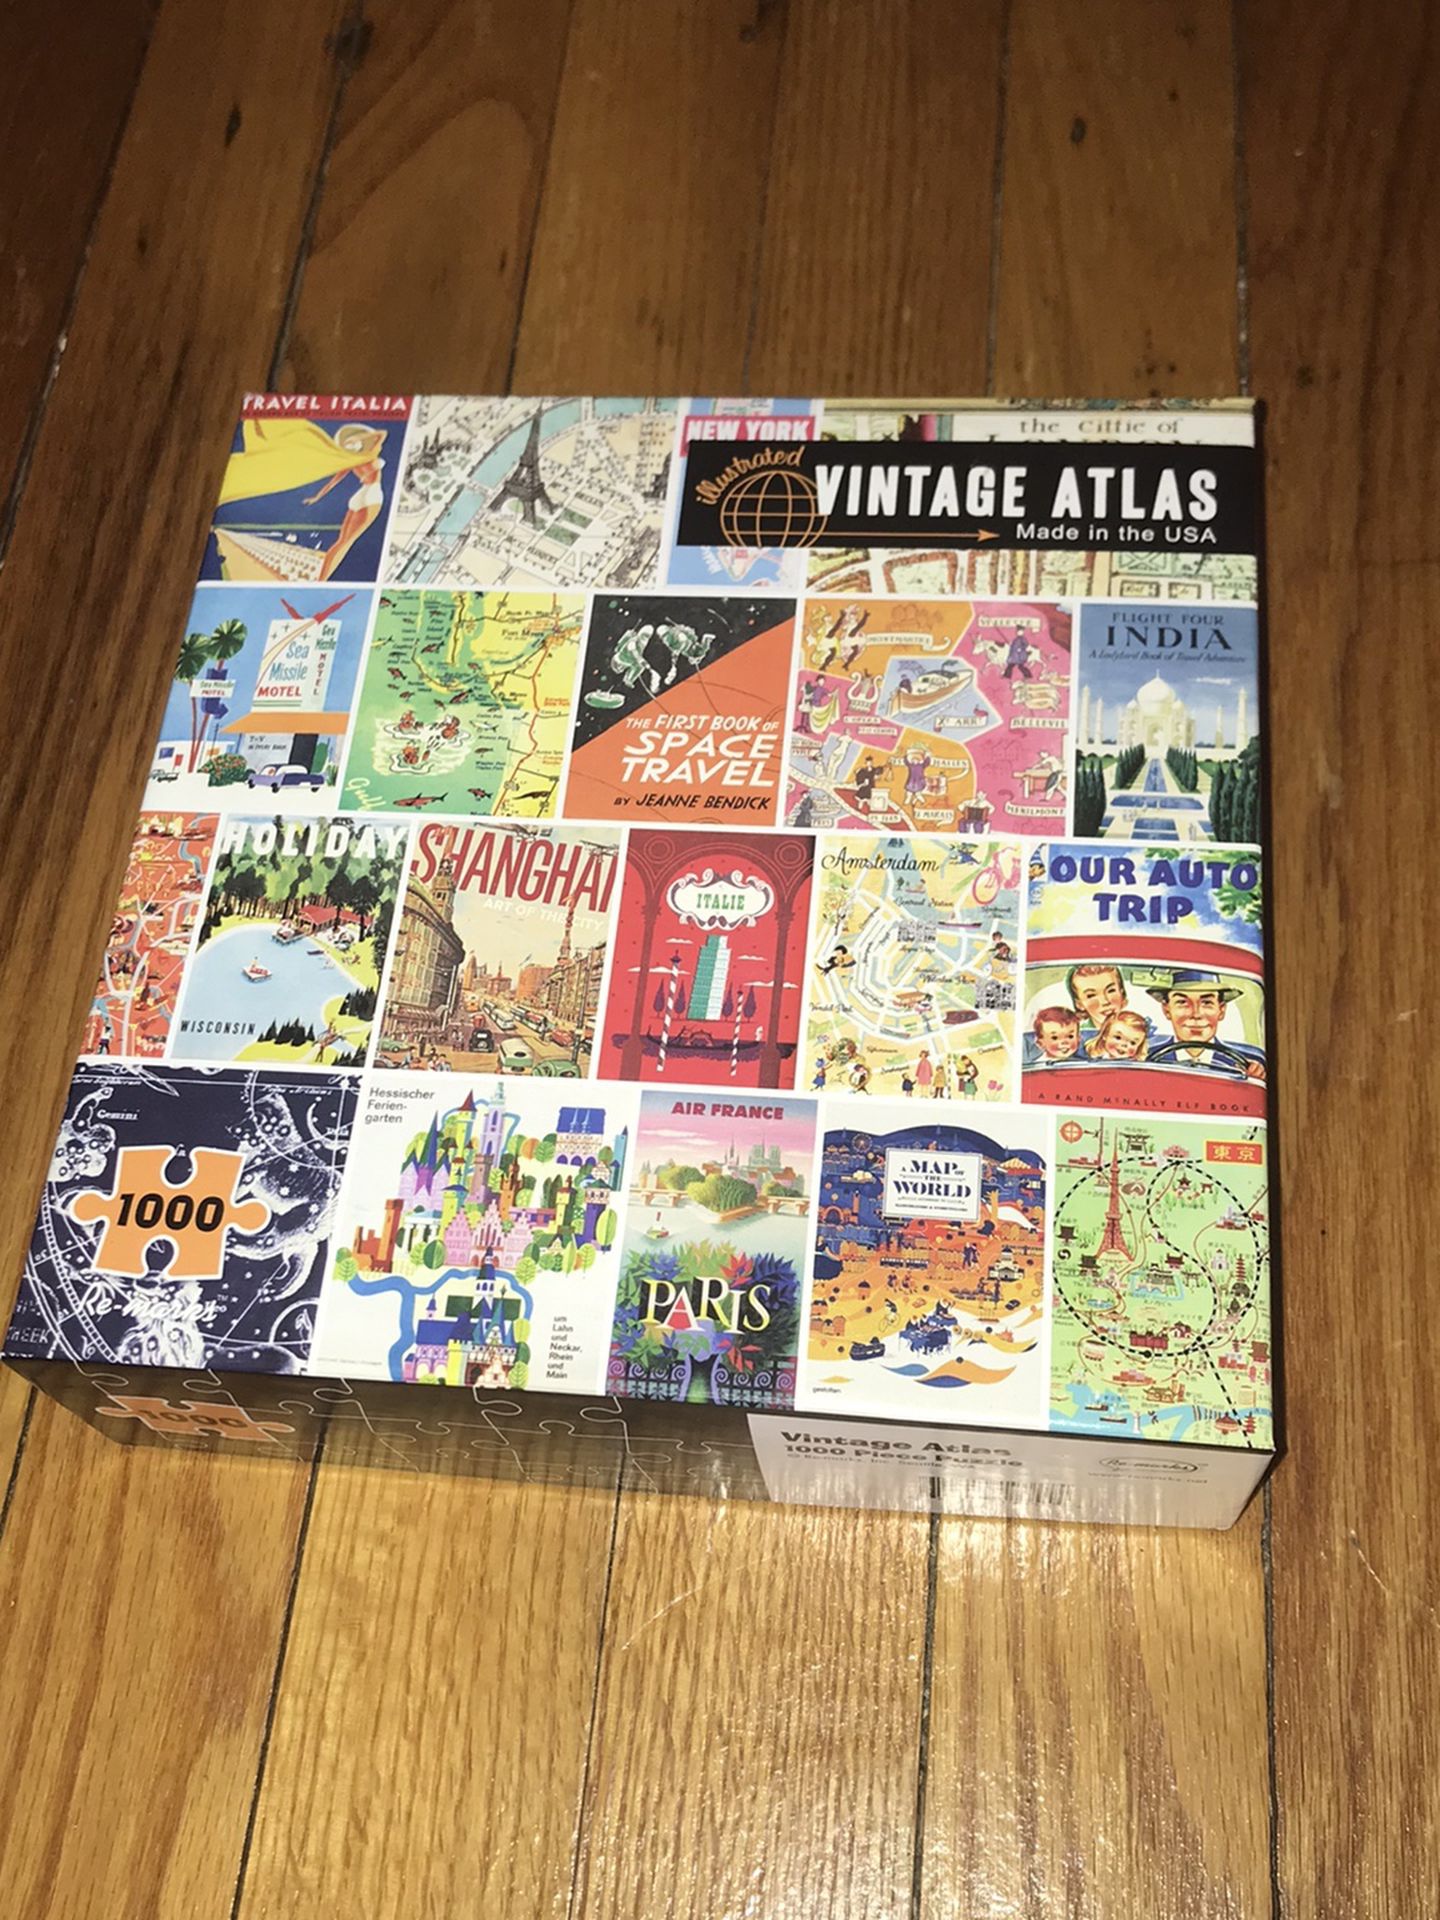 RE-MARKS “Vintage Atlas” 1000 pcs Puzzle With Poster